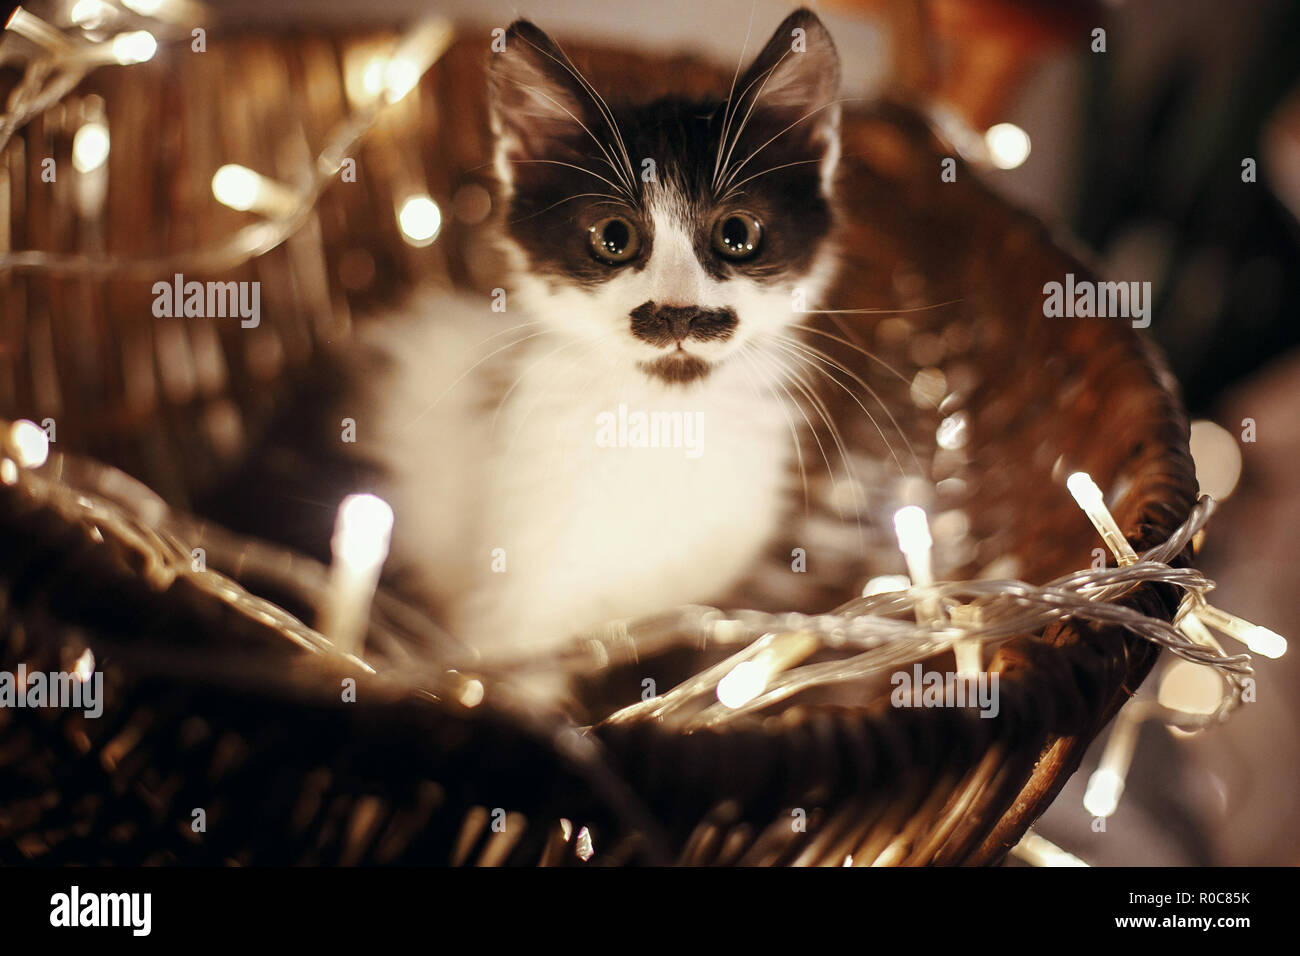 Cute kitty sitting in basket with garland lights under christmas tree in rustic room. Adorable funny kitten with amazing eyes. Merry Christmas concept Stock Photo